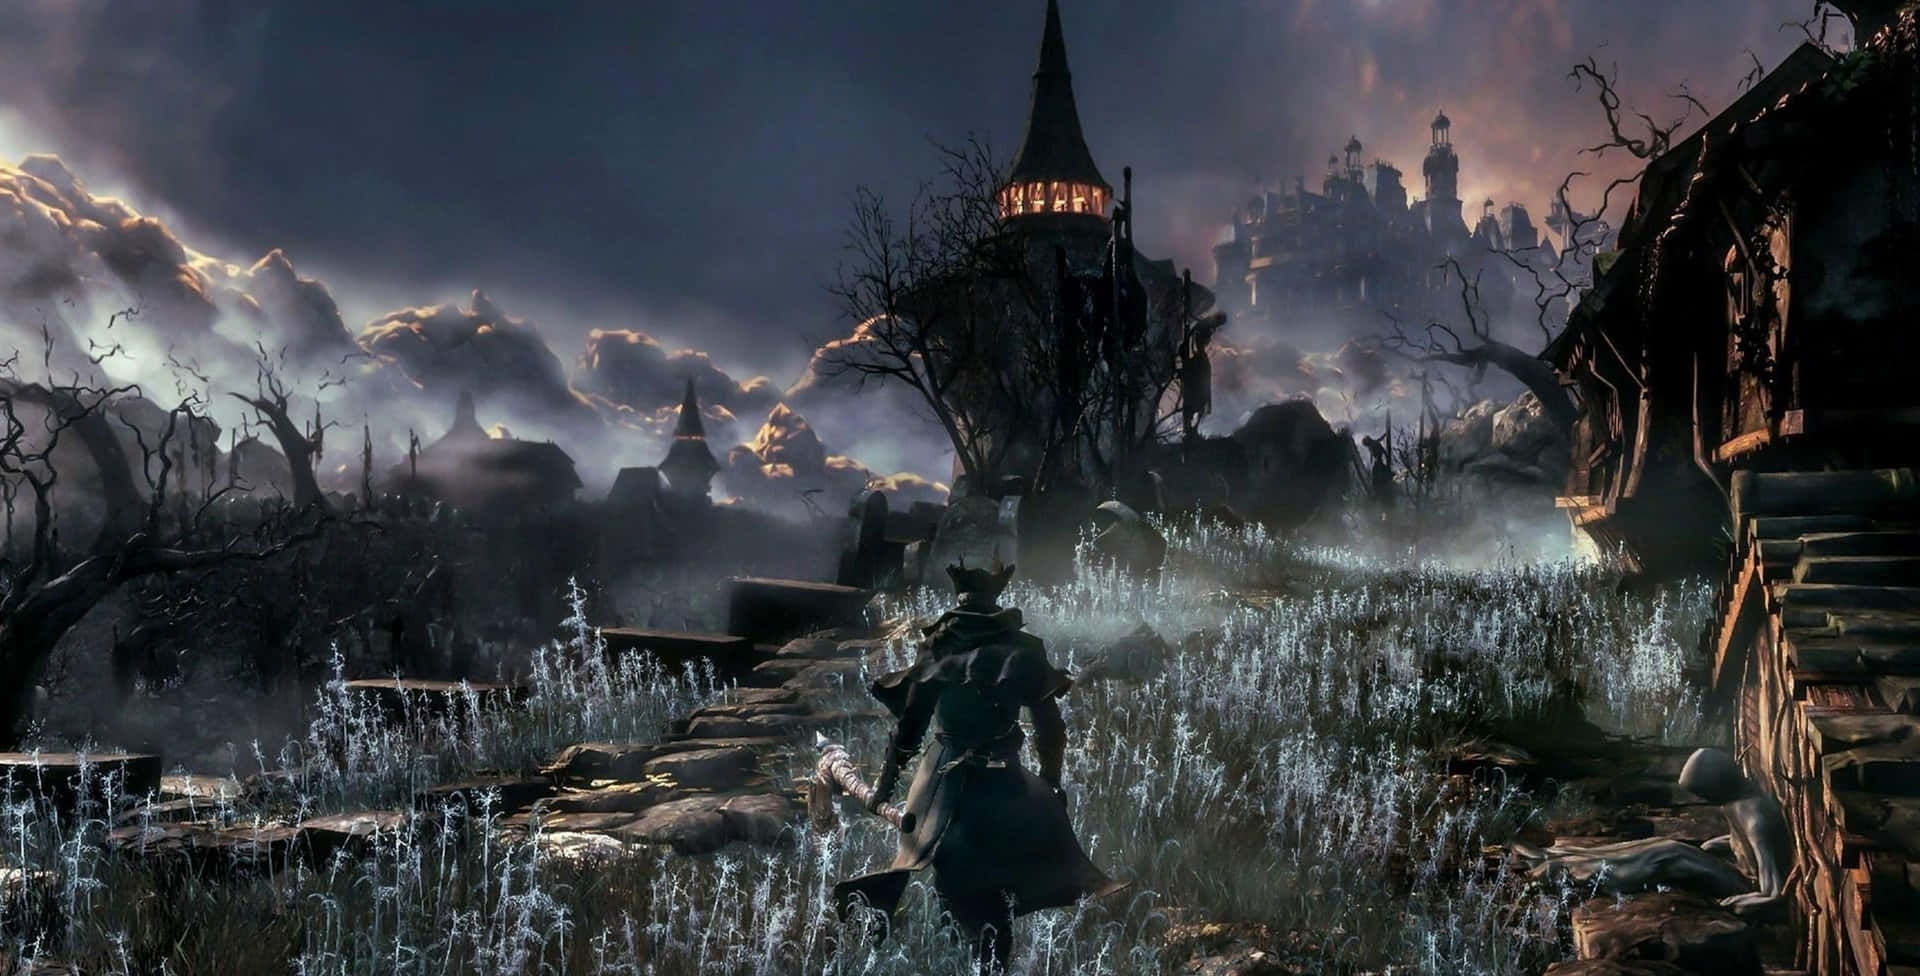 The Hunter faces a fearsome boss in the haunting world of Bloodborne